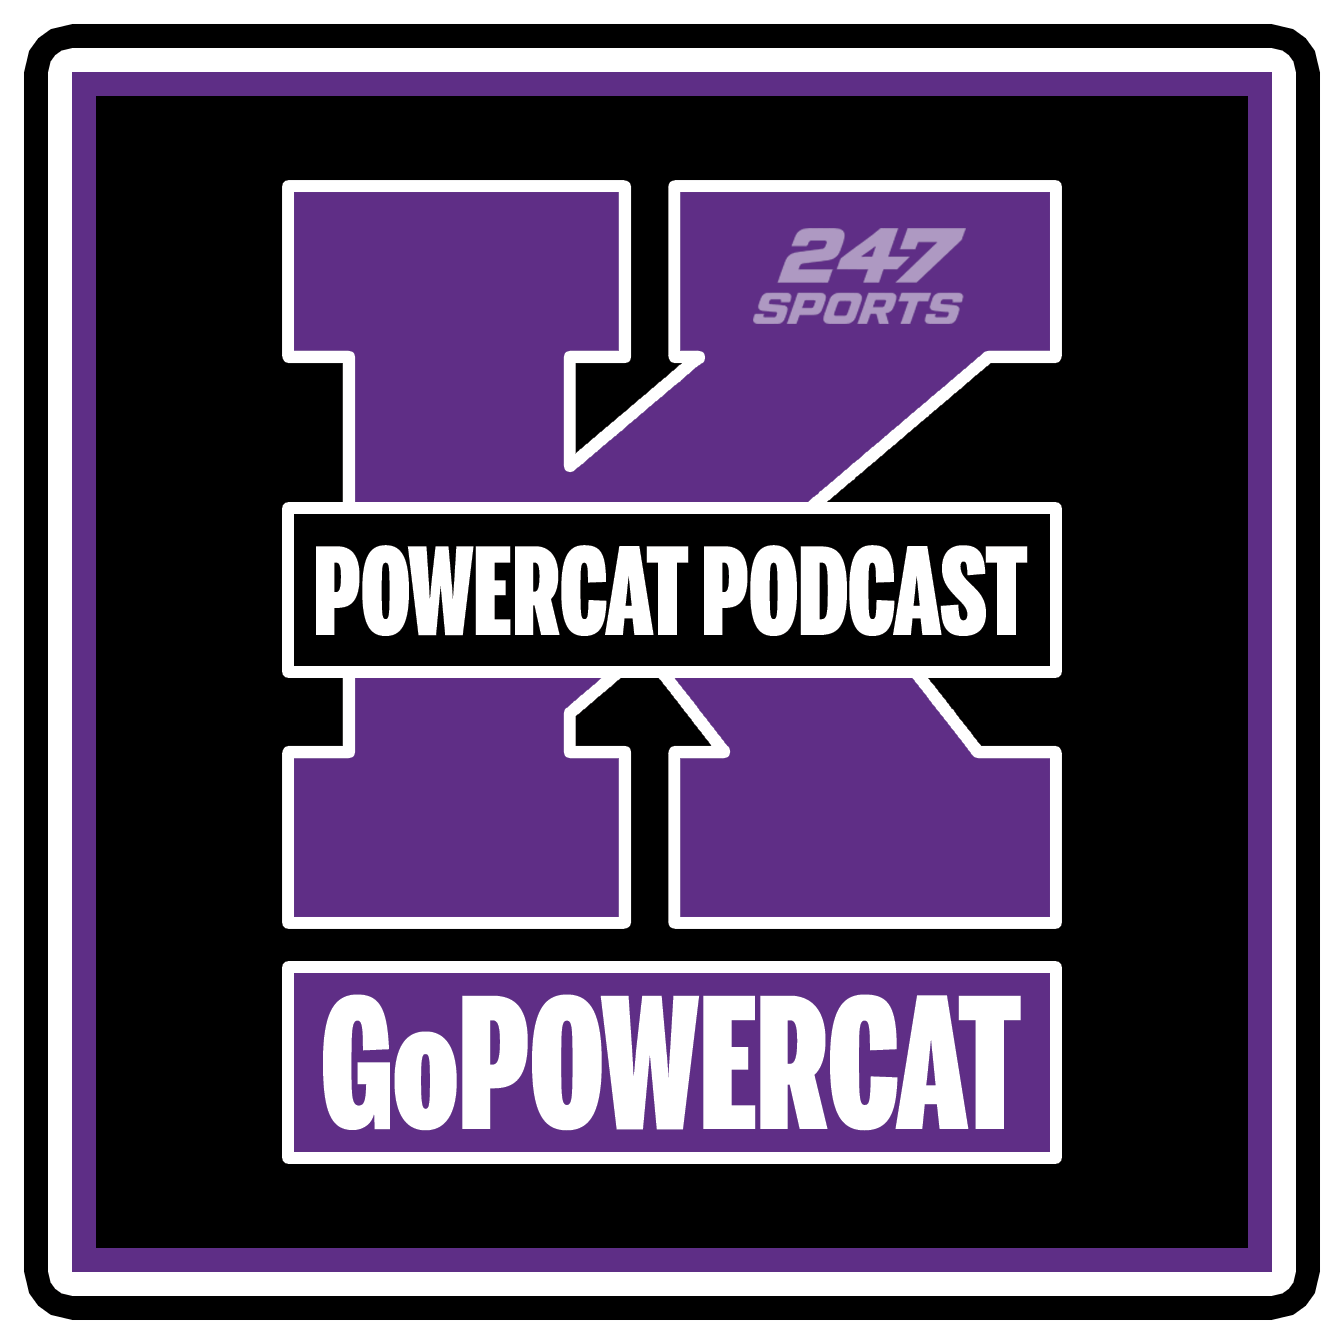 Powercat Podcast | A new QB at K-State and some interesting viewer questions